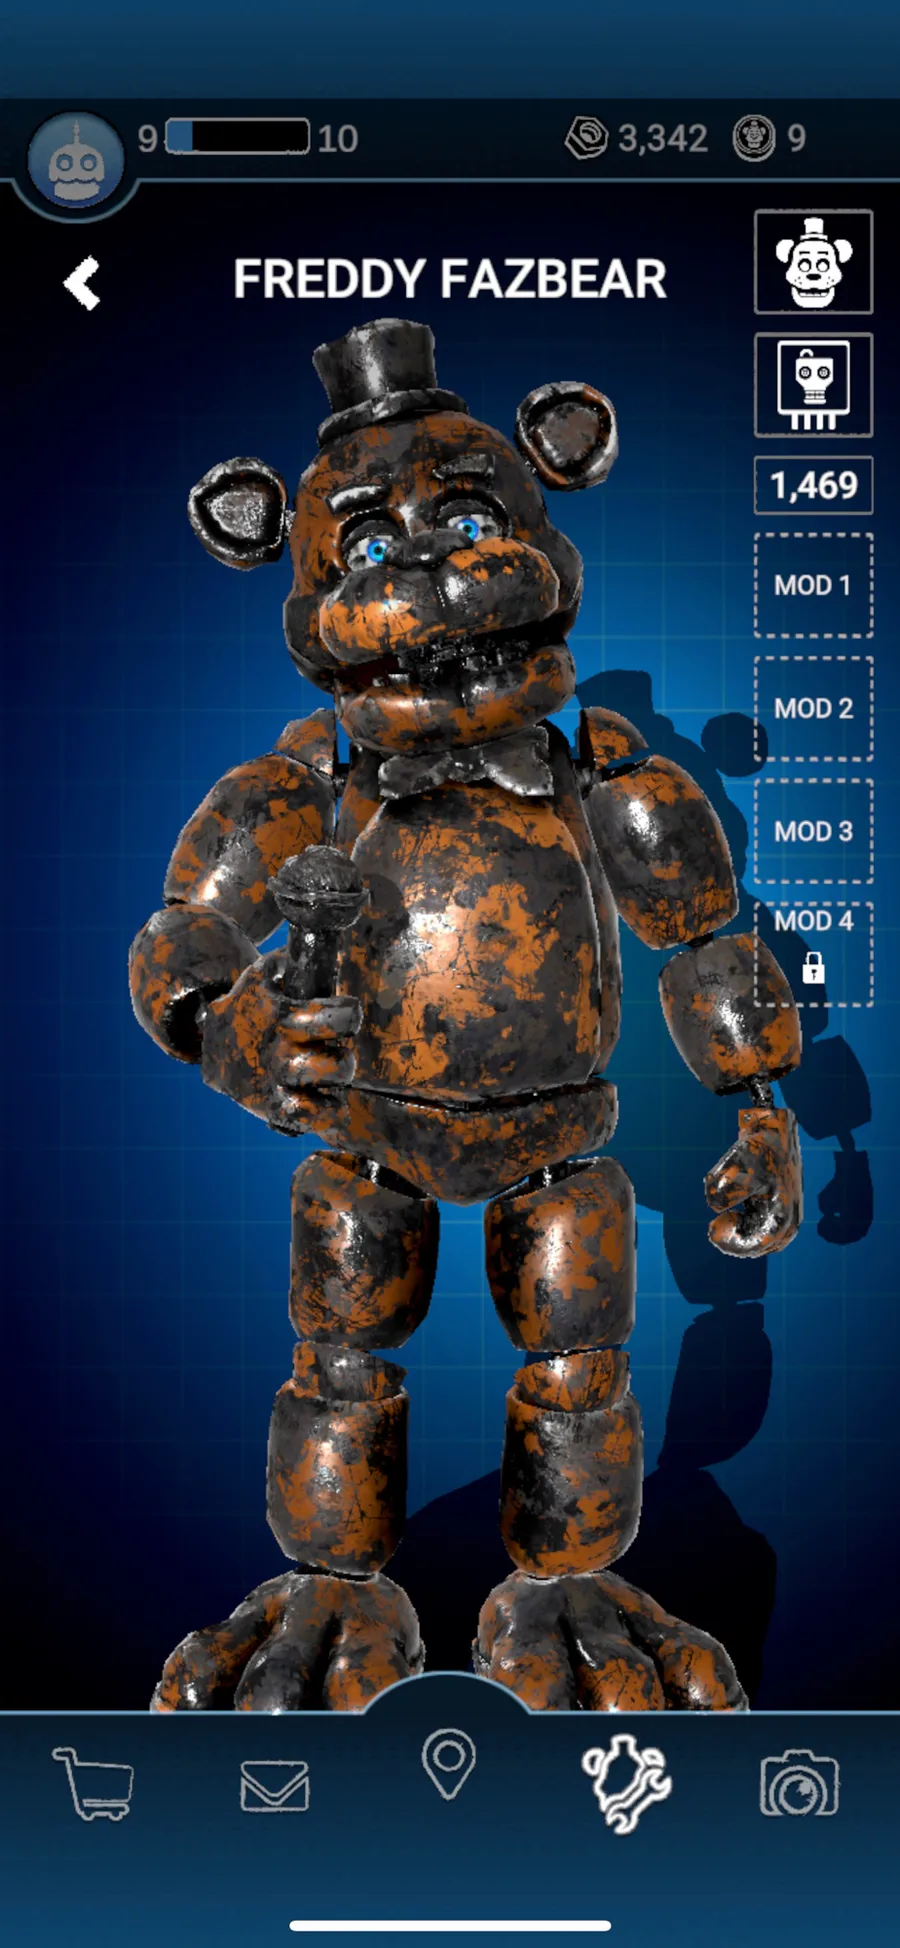 Five Nights at Freddy's is getting a mobile AR game this fall